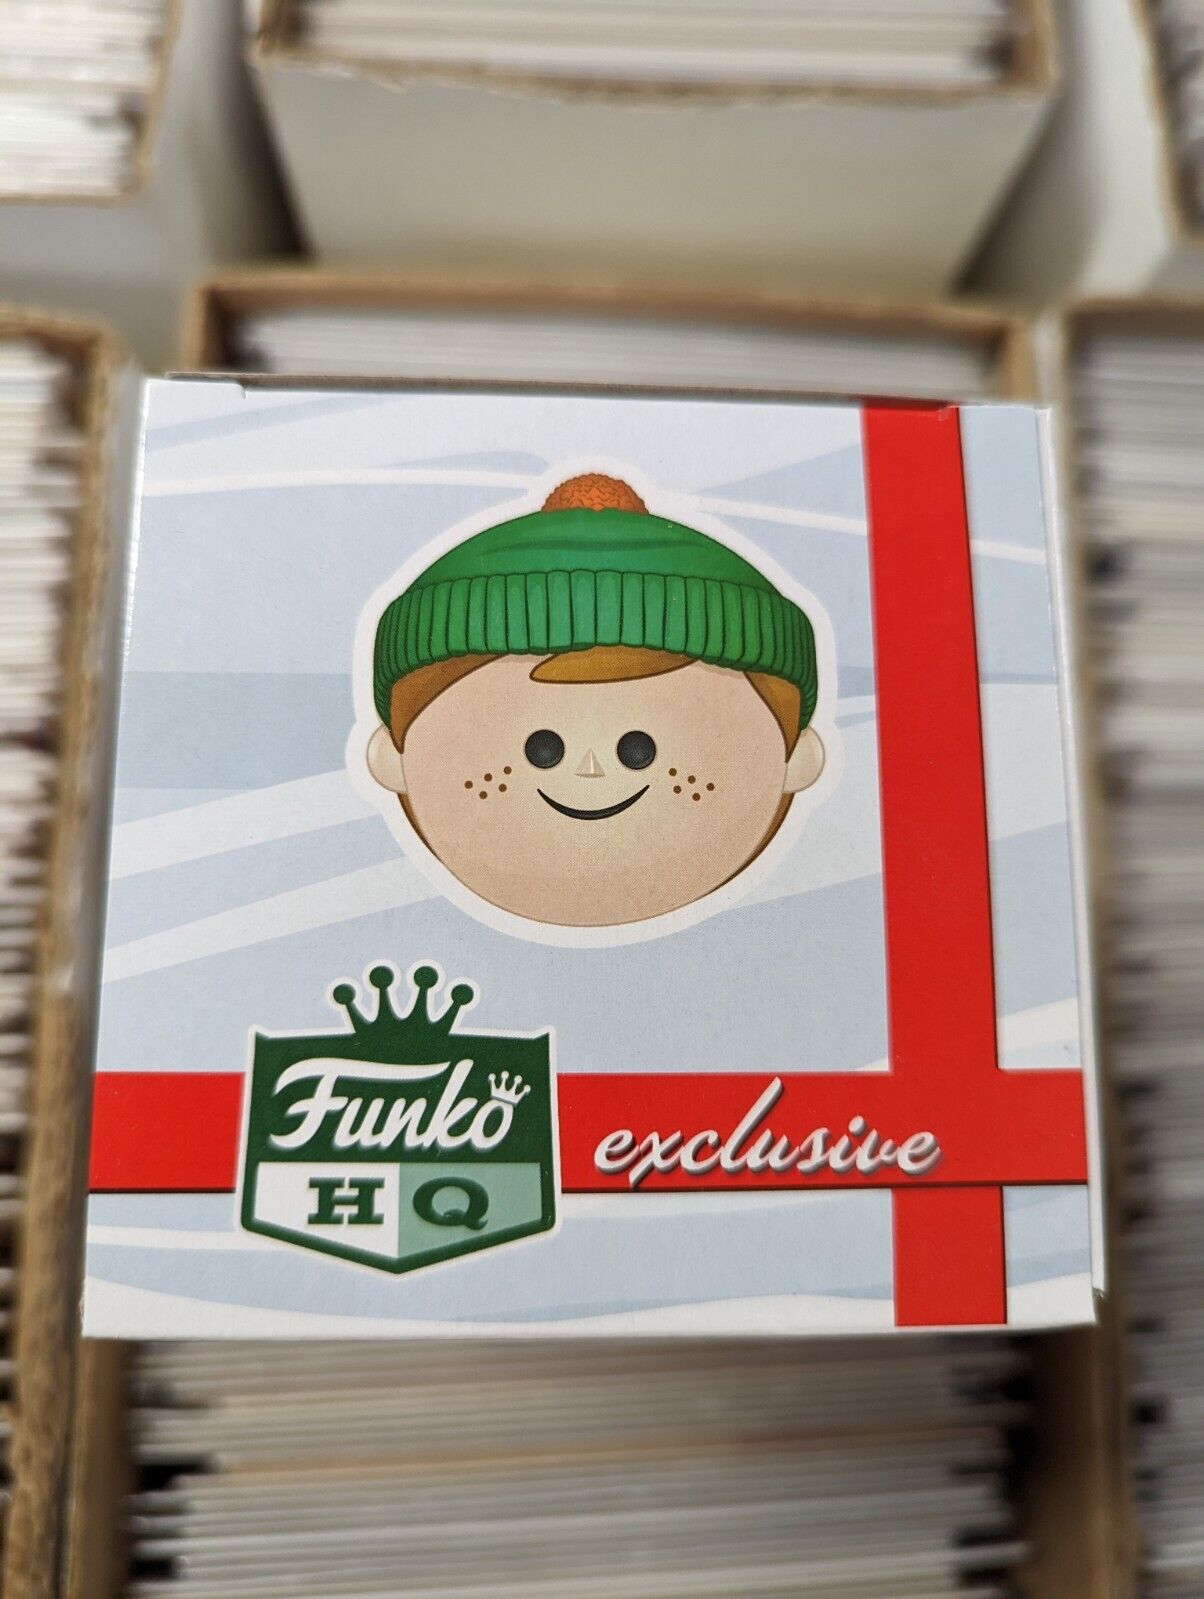 Funko HQ Exclusive Holiday Freddy 12 Says Of Funko